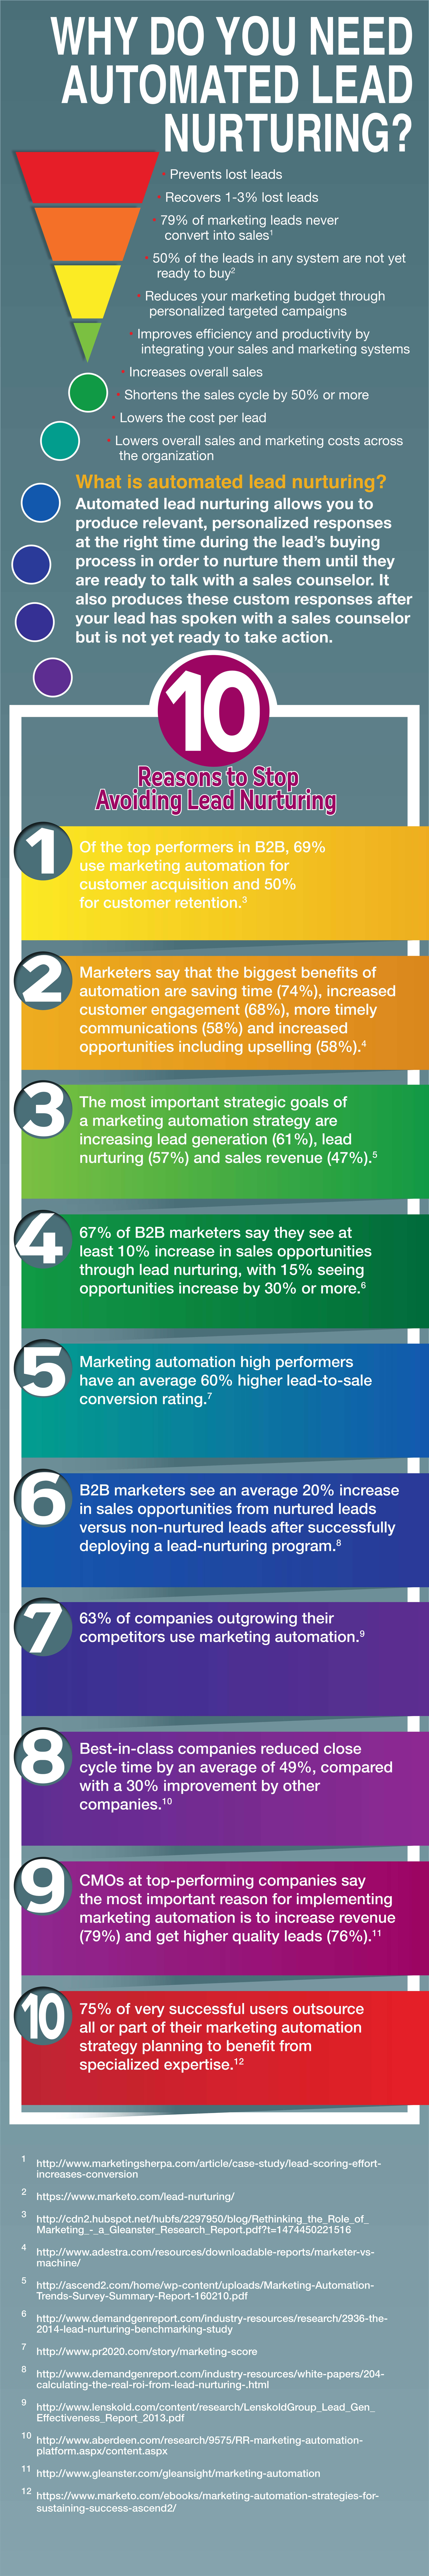 me_infographic_10_reasons_to_stop_avoiding_automated_lead_nurturing_draft2.jpg